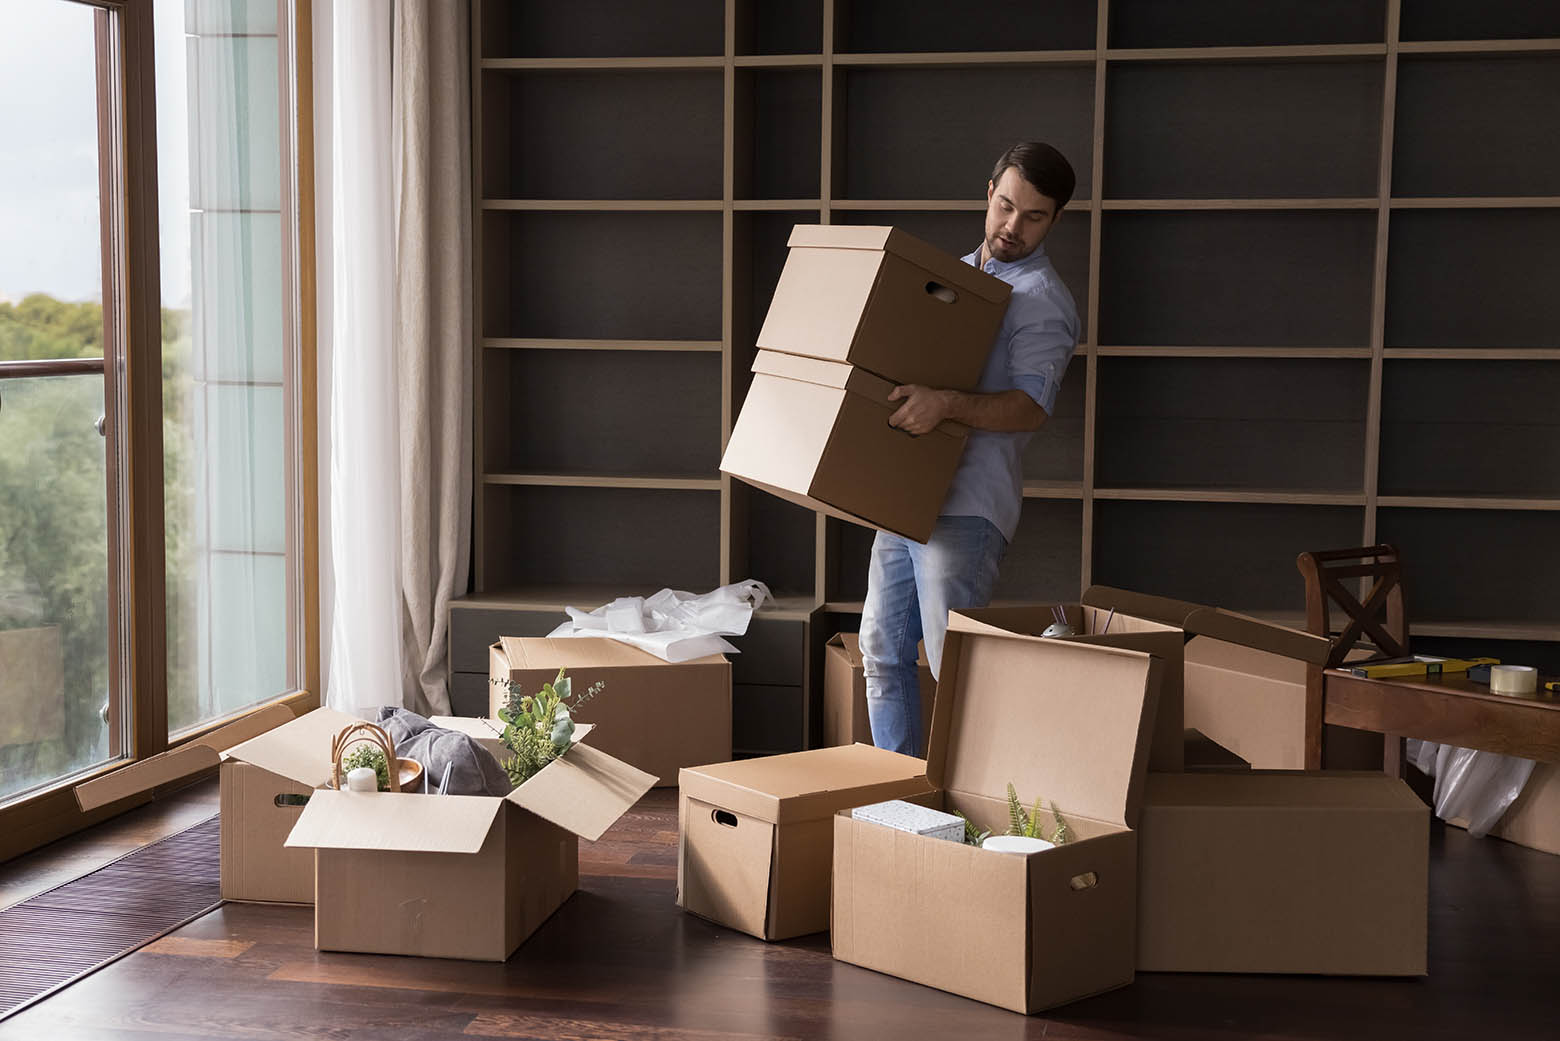 Organizing Storage in Rental Spaces: Temporary Solutions for Tenants